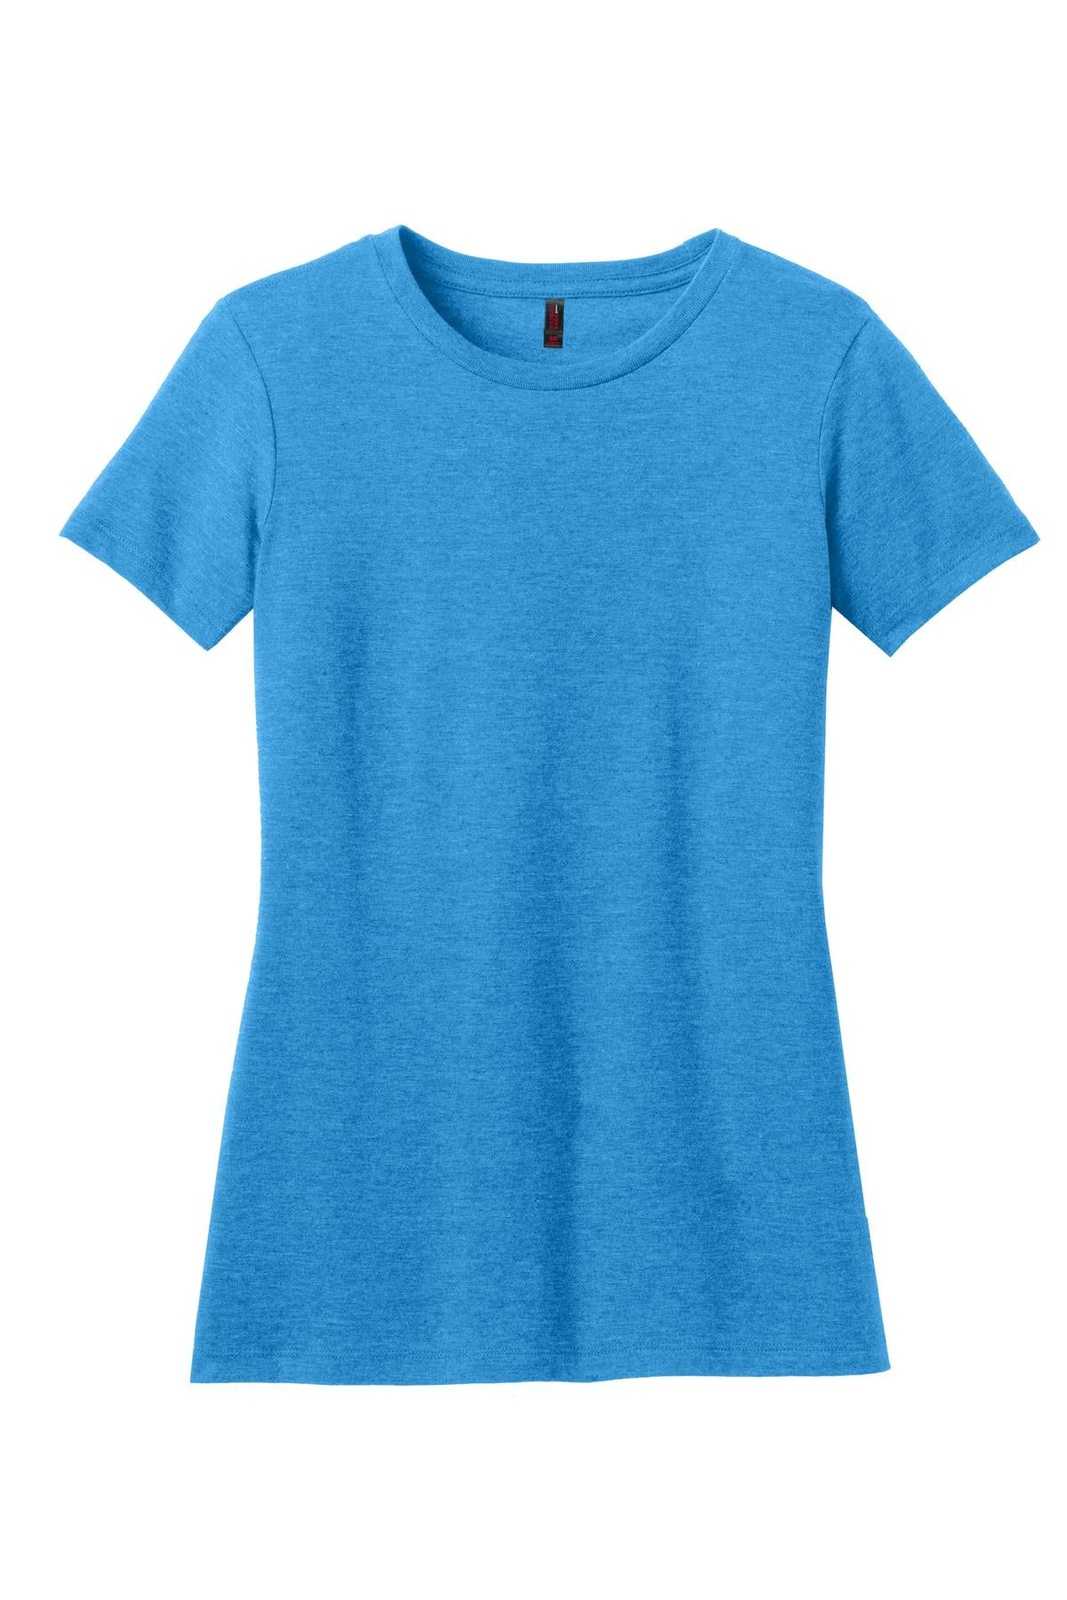 District DM108L Women's Perfect Blend Tee - Heathered Bright Turquoise - HIT a Double - 1